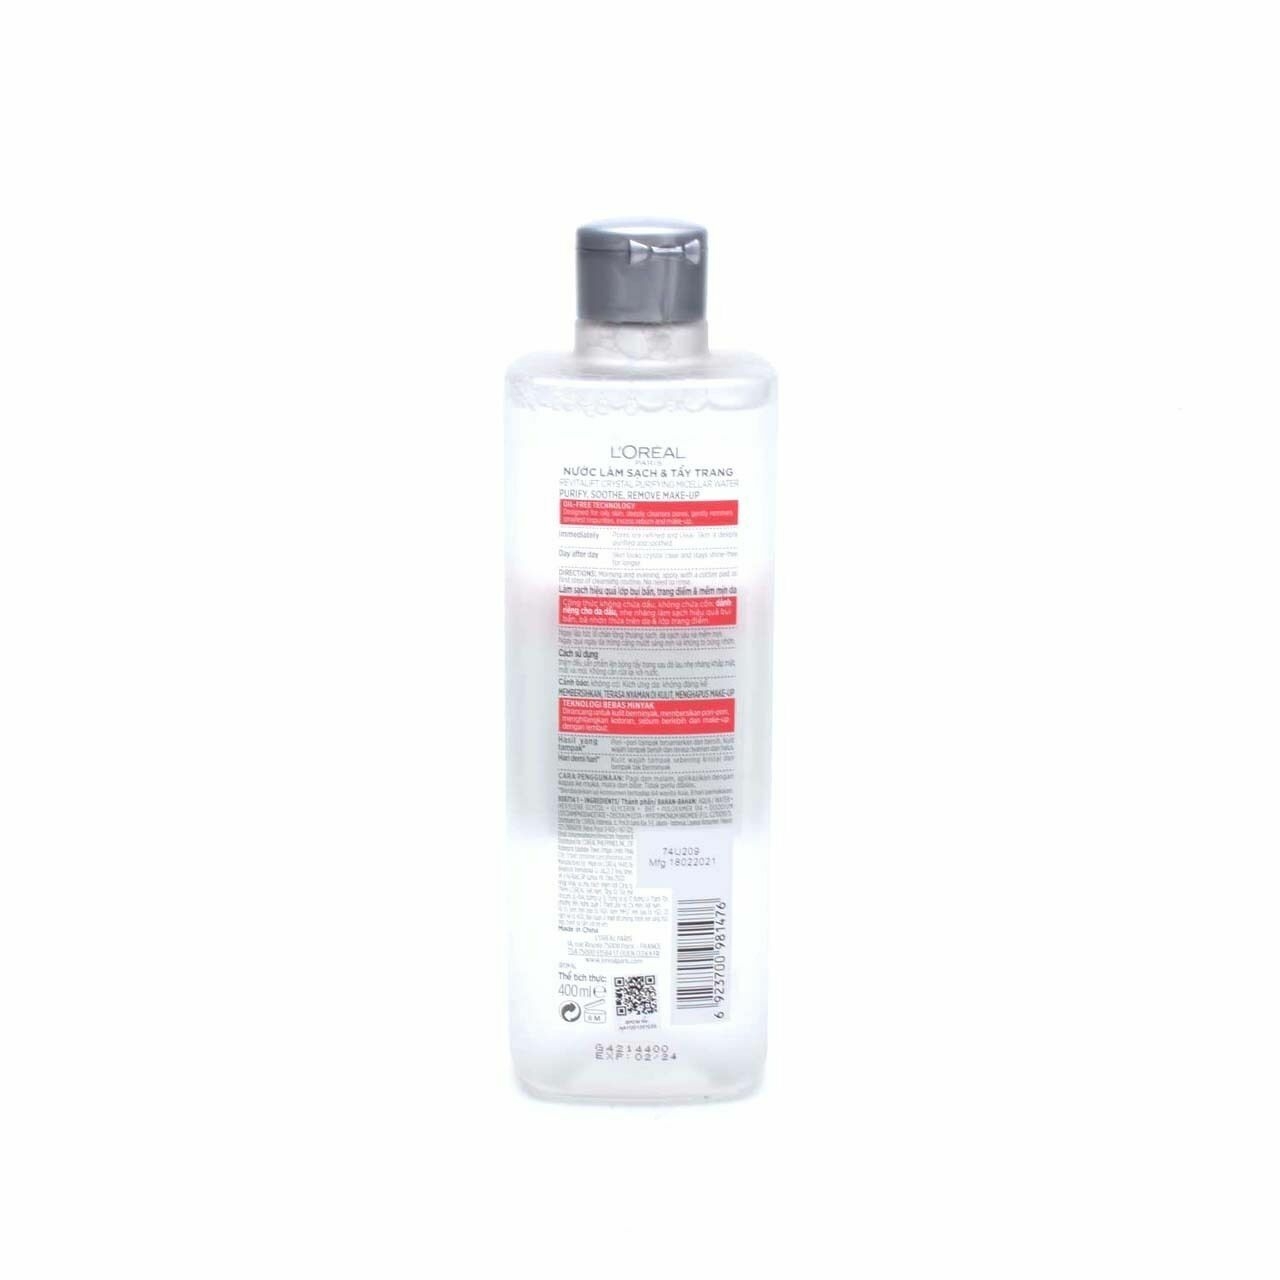 L'Oreal Paris Revitalift Crystal Purifying Micellar Water for Oily Skin Skin Care